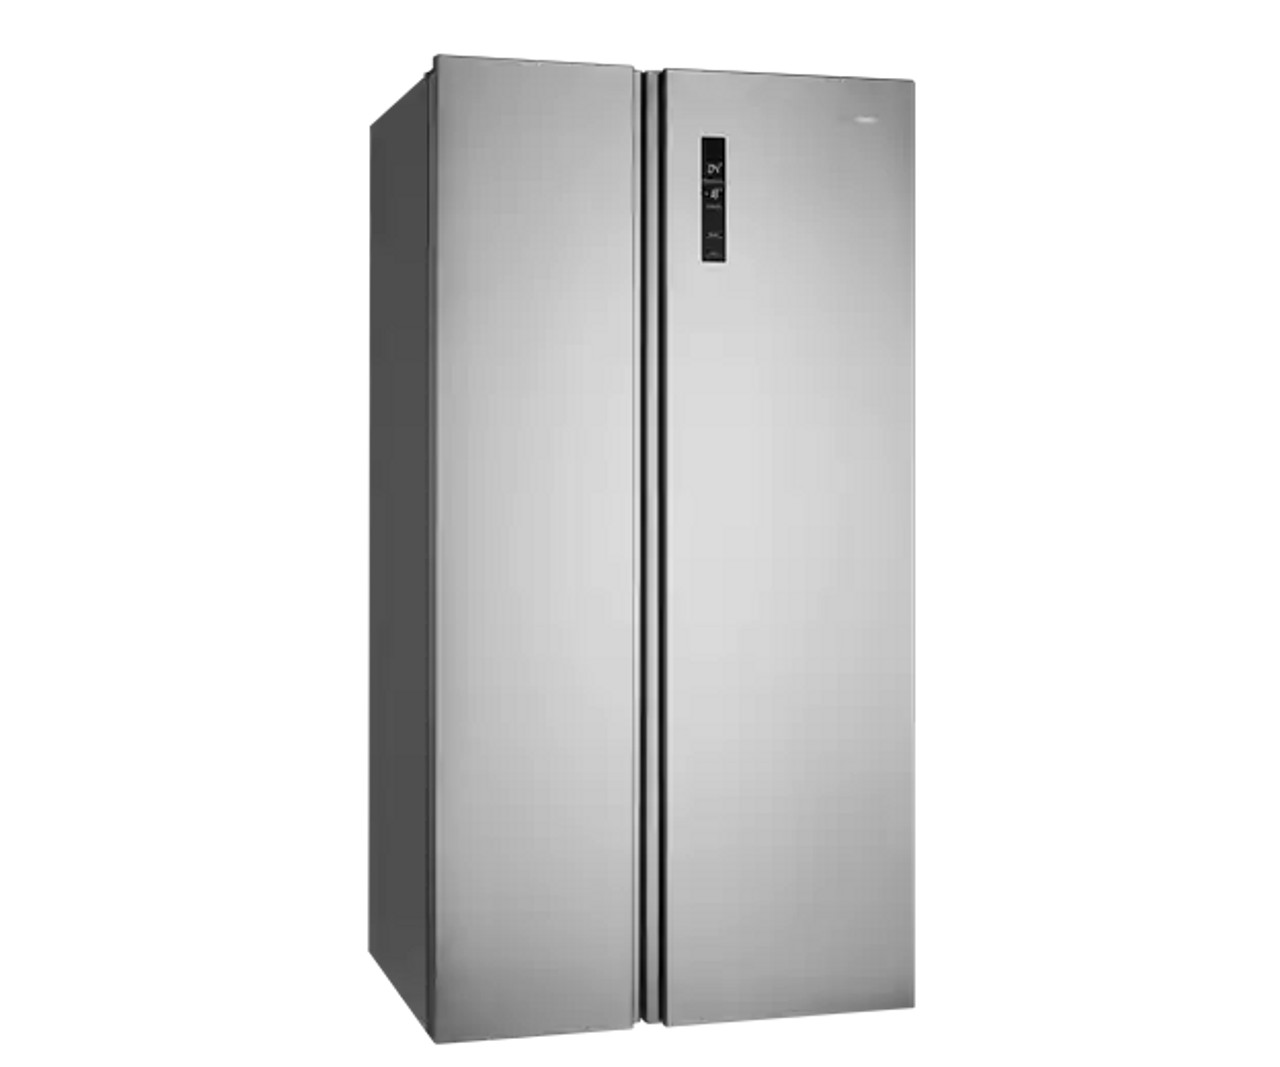 WSE6630SA - 624L Side by Side Refrigerator - Arctic Silver